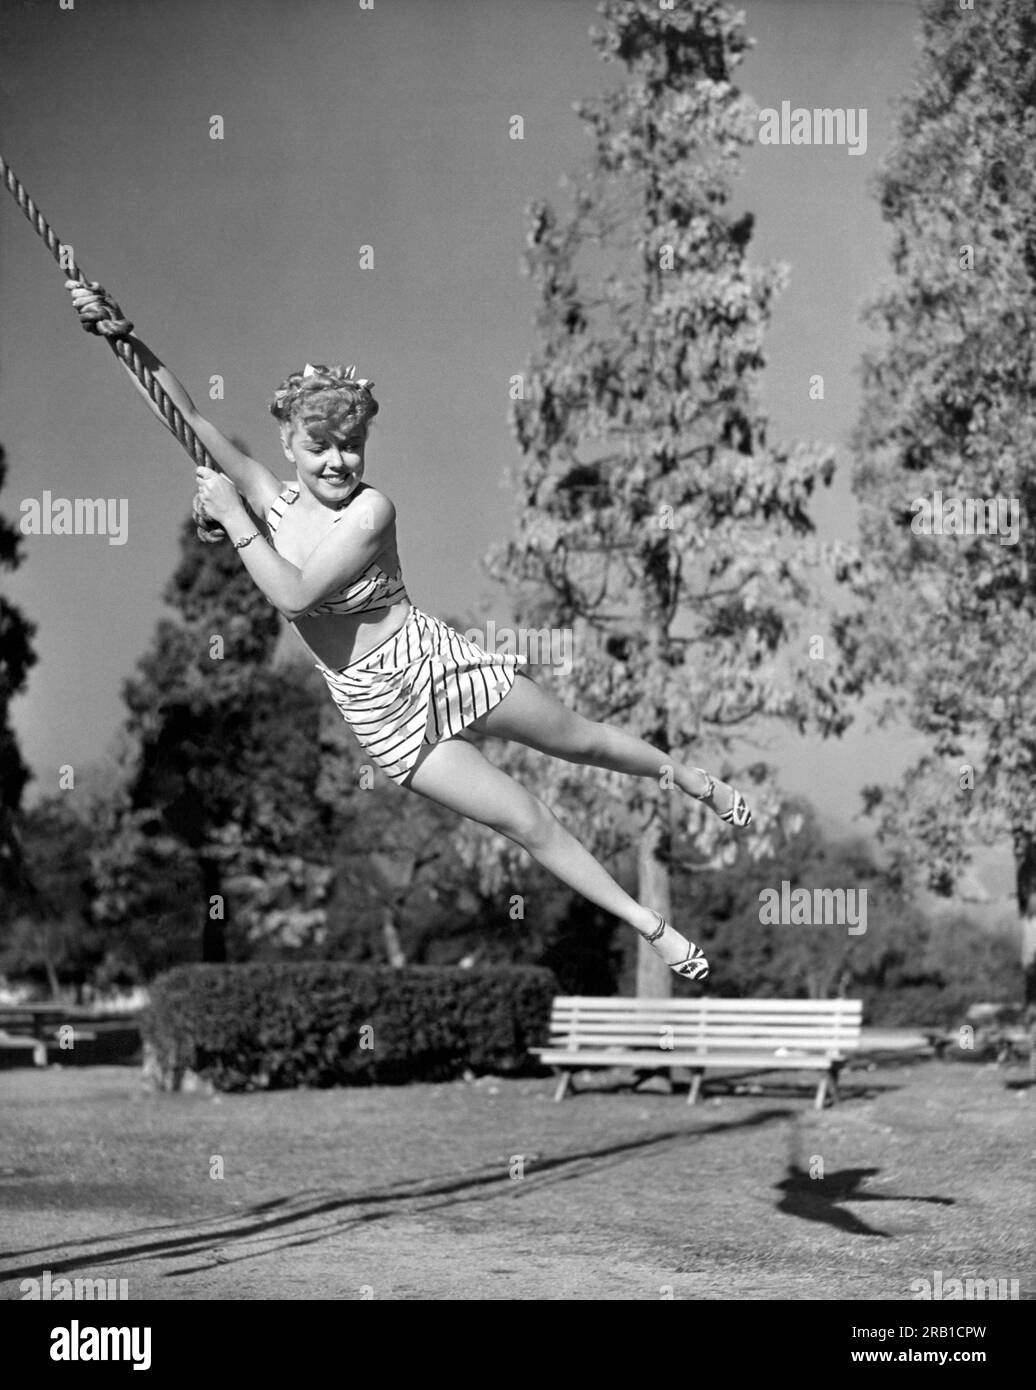 Hollywood, California: January 5, 1942 Actress Phyllis Ruth swings into the scene on a rope. Stock Photo